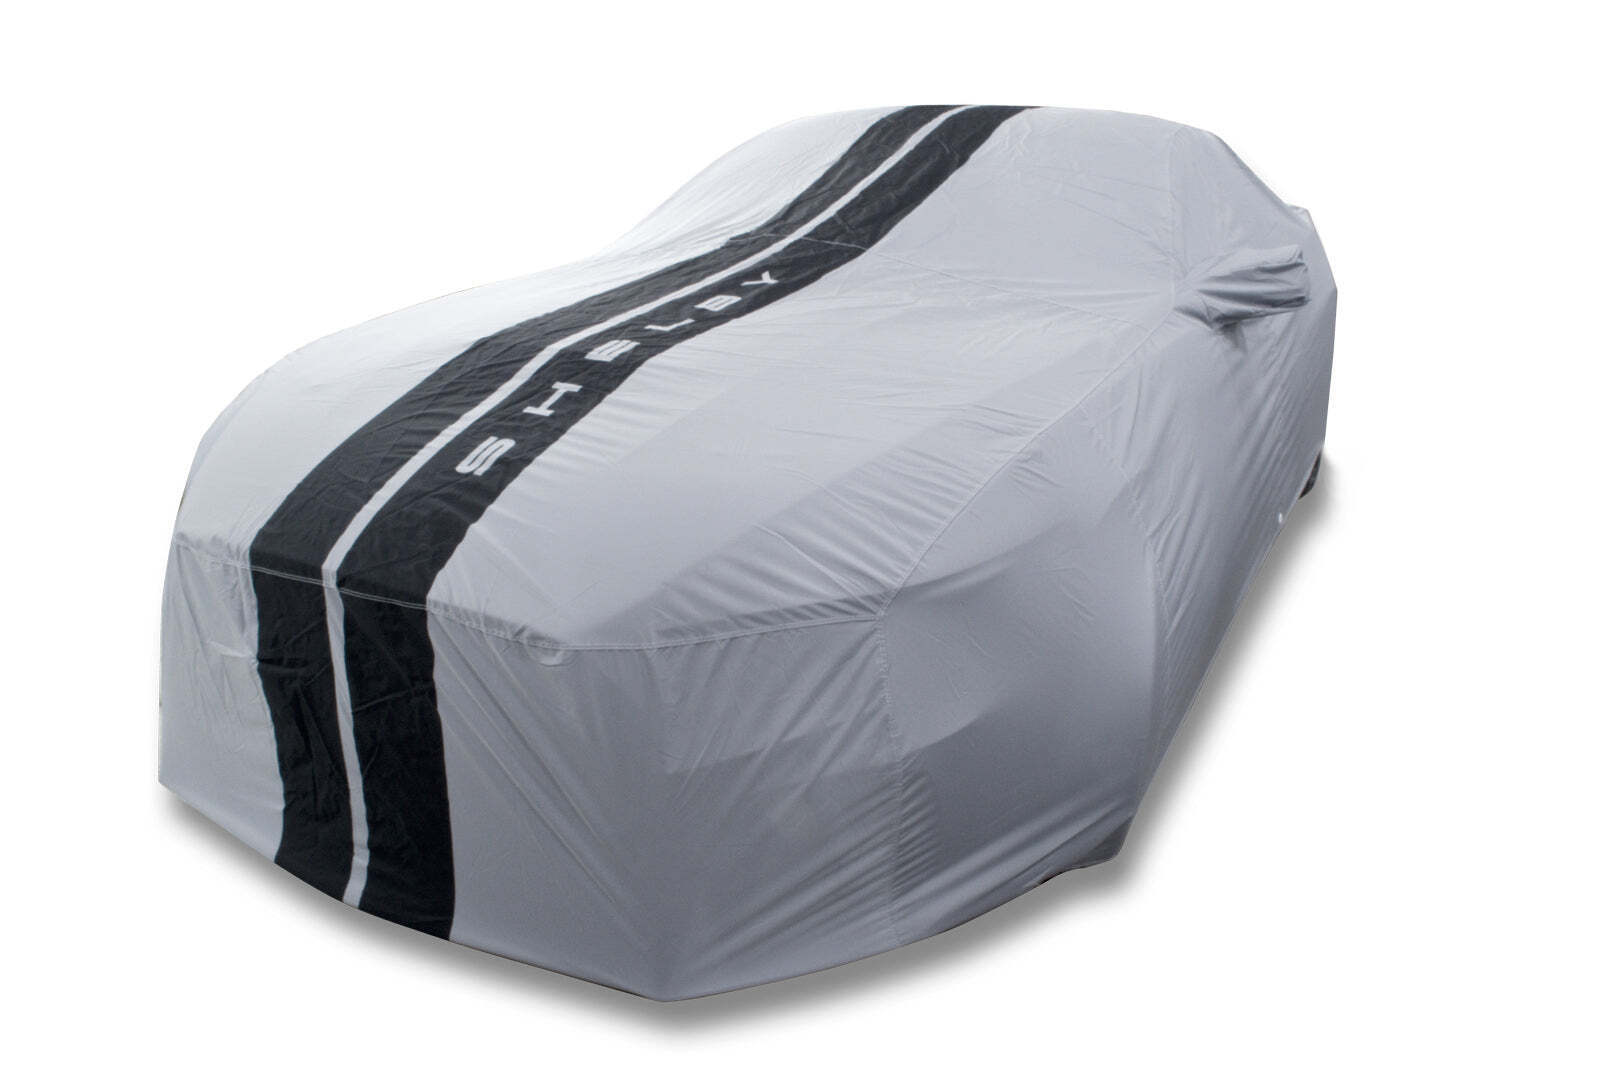 2016-2020 Mustang Shelby GT350R Genuine Ford Car Cover Fits Tall Race Spoiler